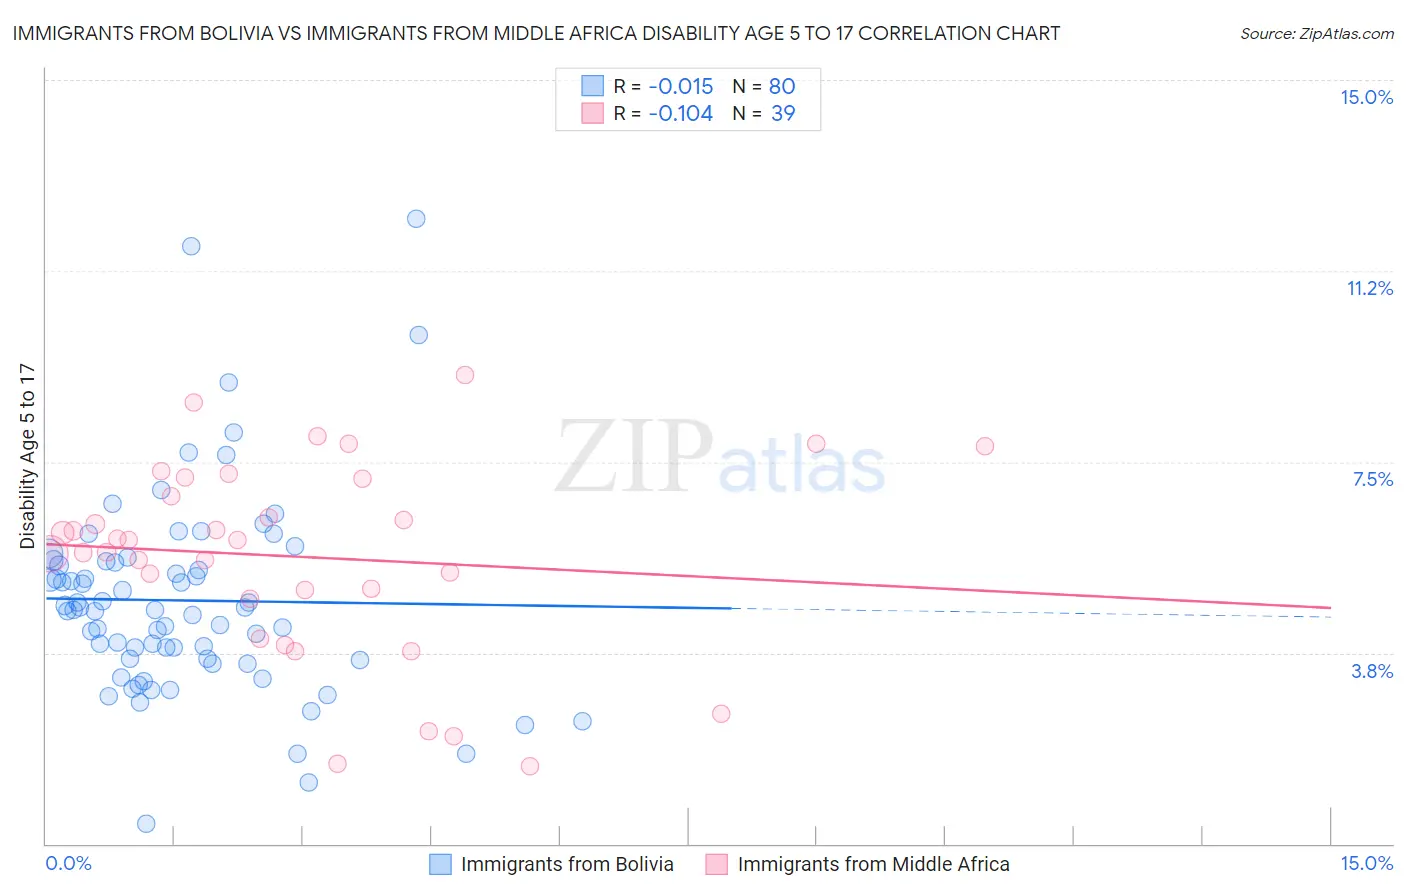 Immigrants from Bolivia vs Immigrants from Middle Africa Disability Age 5 to 17